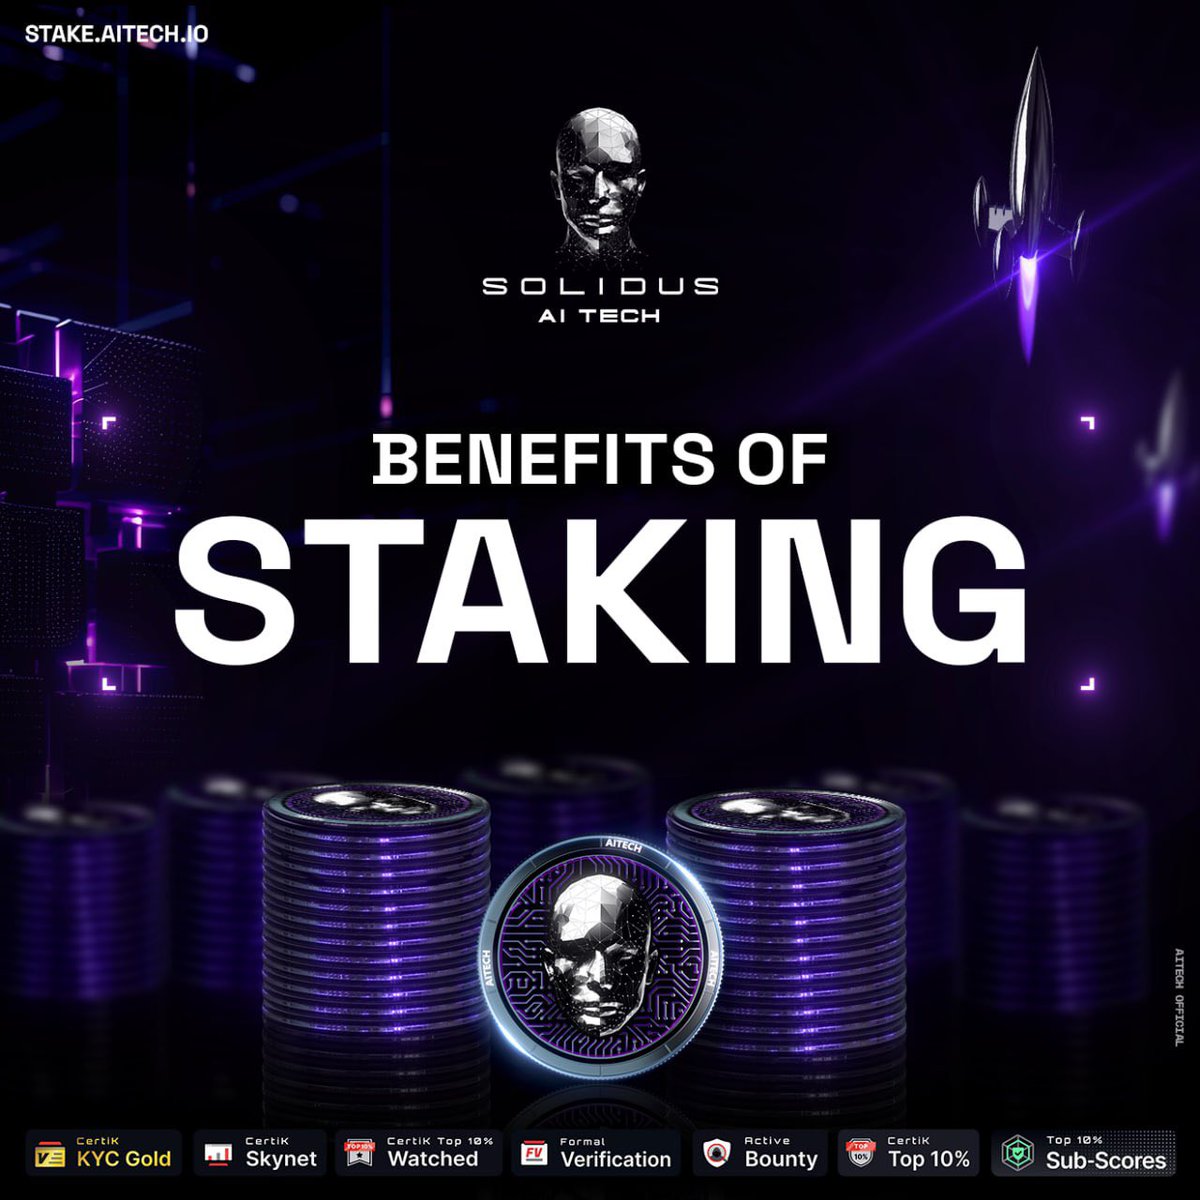 🔥 Staking $AITECH!

✨ Benefits of Staking $AITECH:

🔹 AITECH Pad Tier 
🔹 DAO Voting Rights 
🔹 APY Based on the Pool Duration 

➡️ Stake $AITECH now: stake.aitech.io